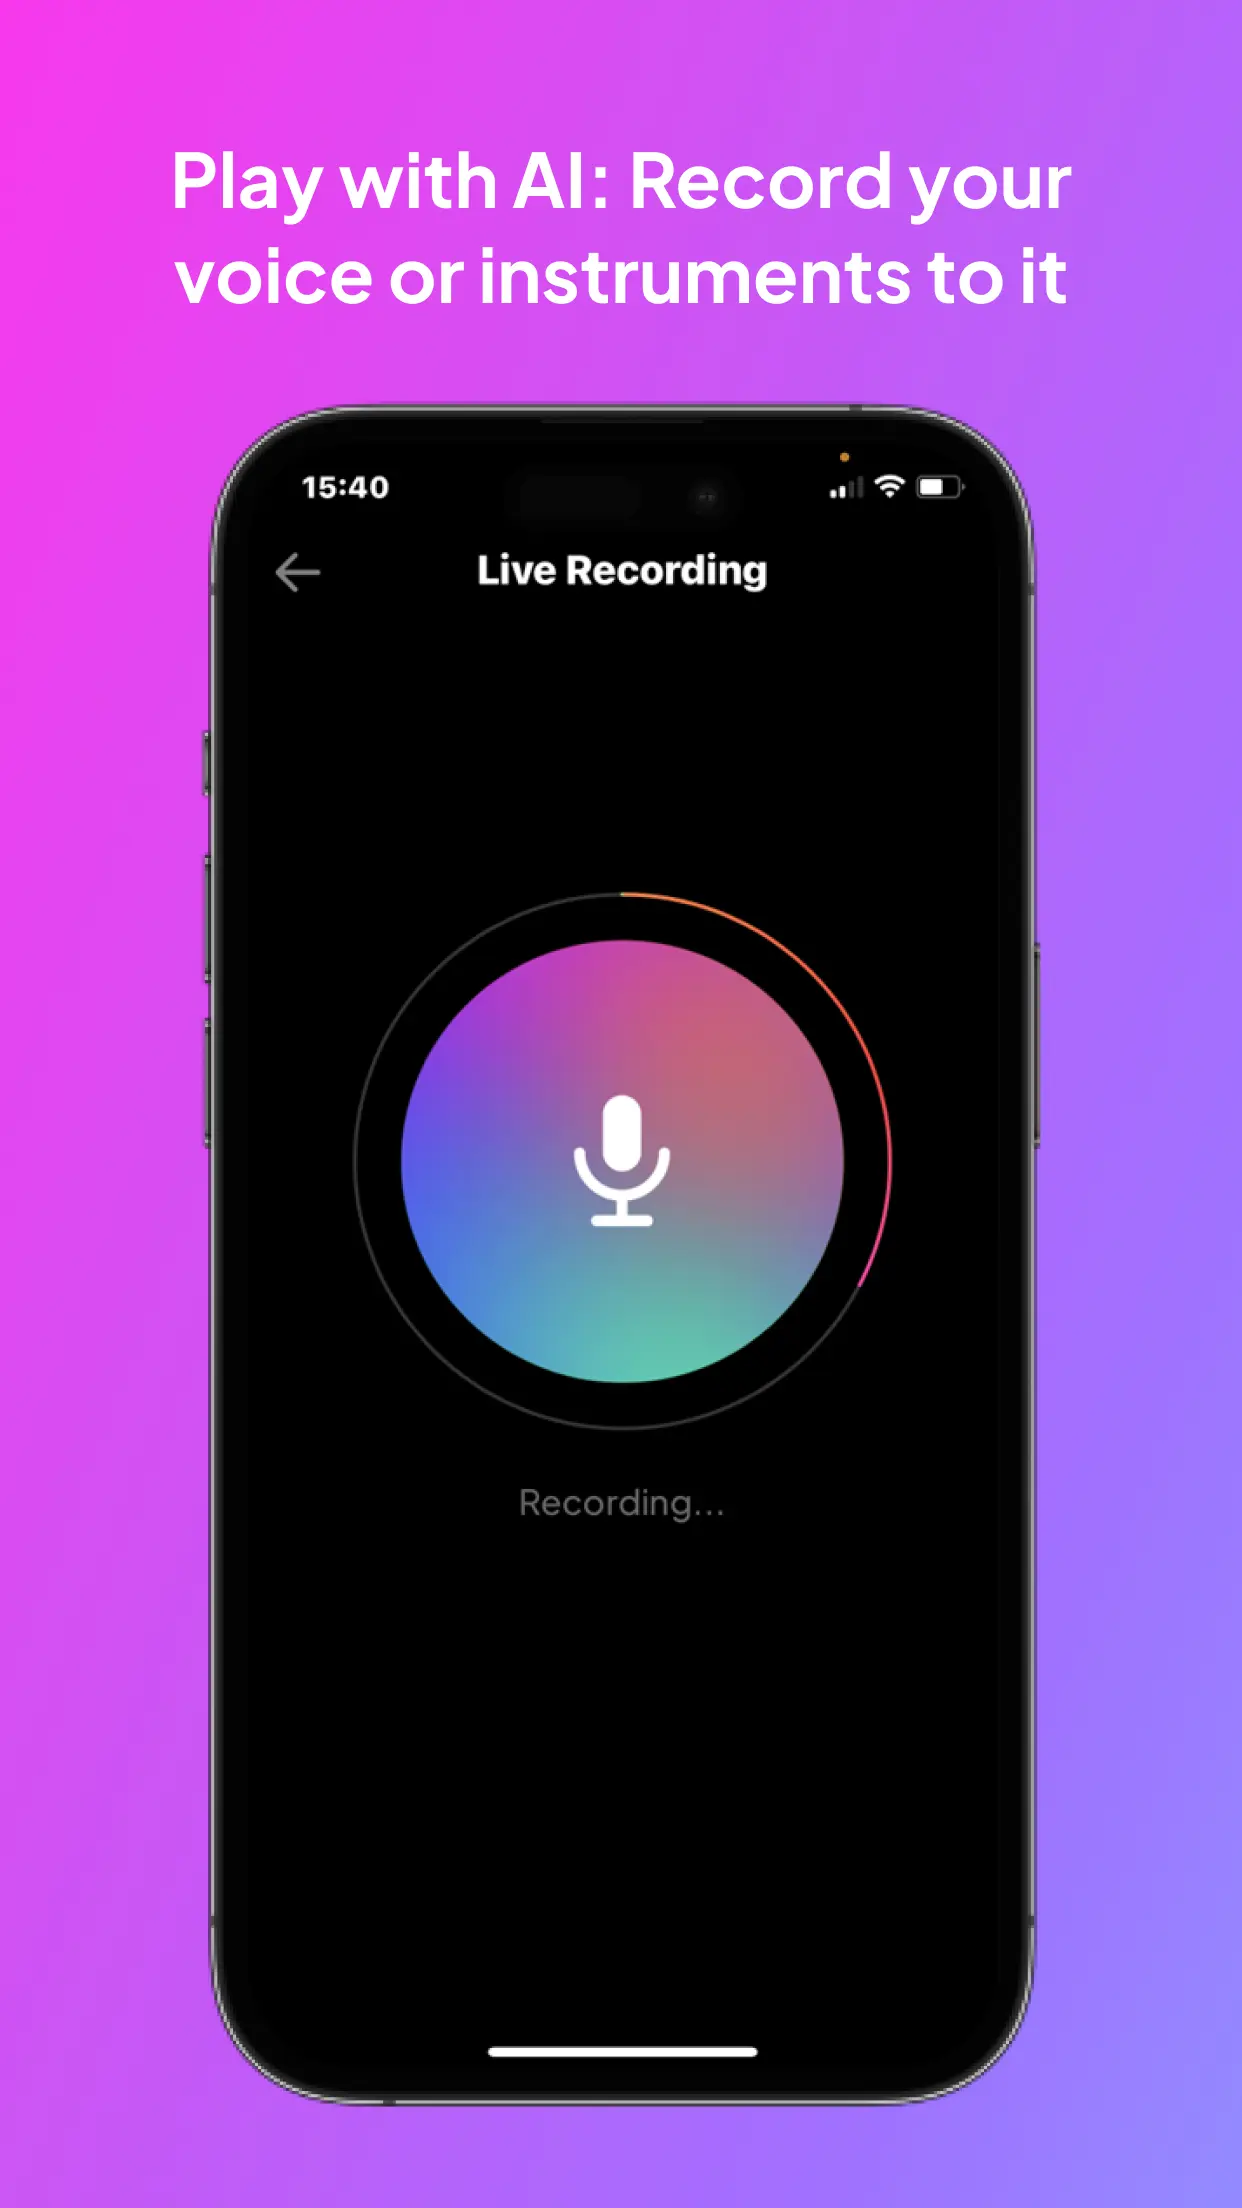 Jamahook mobile app on iPhone frame: 'Okay with AI: Record your voice or instruments to it.'